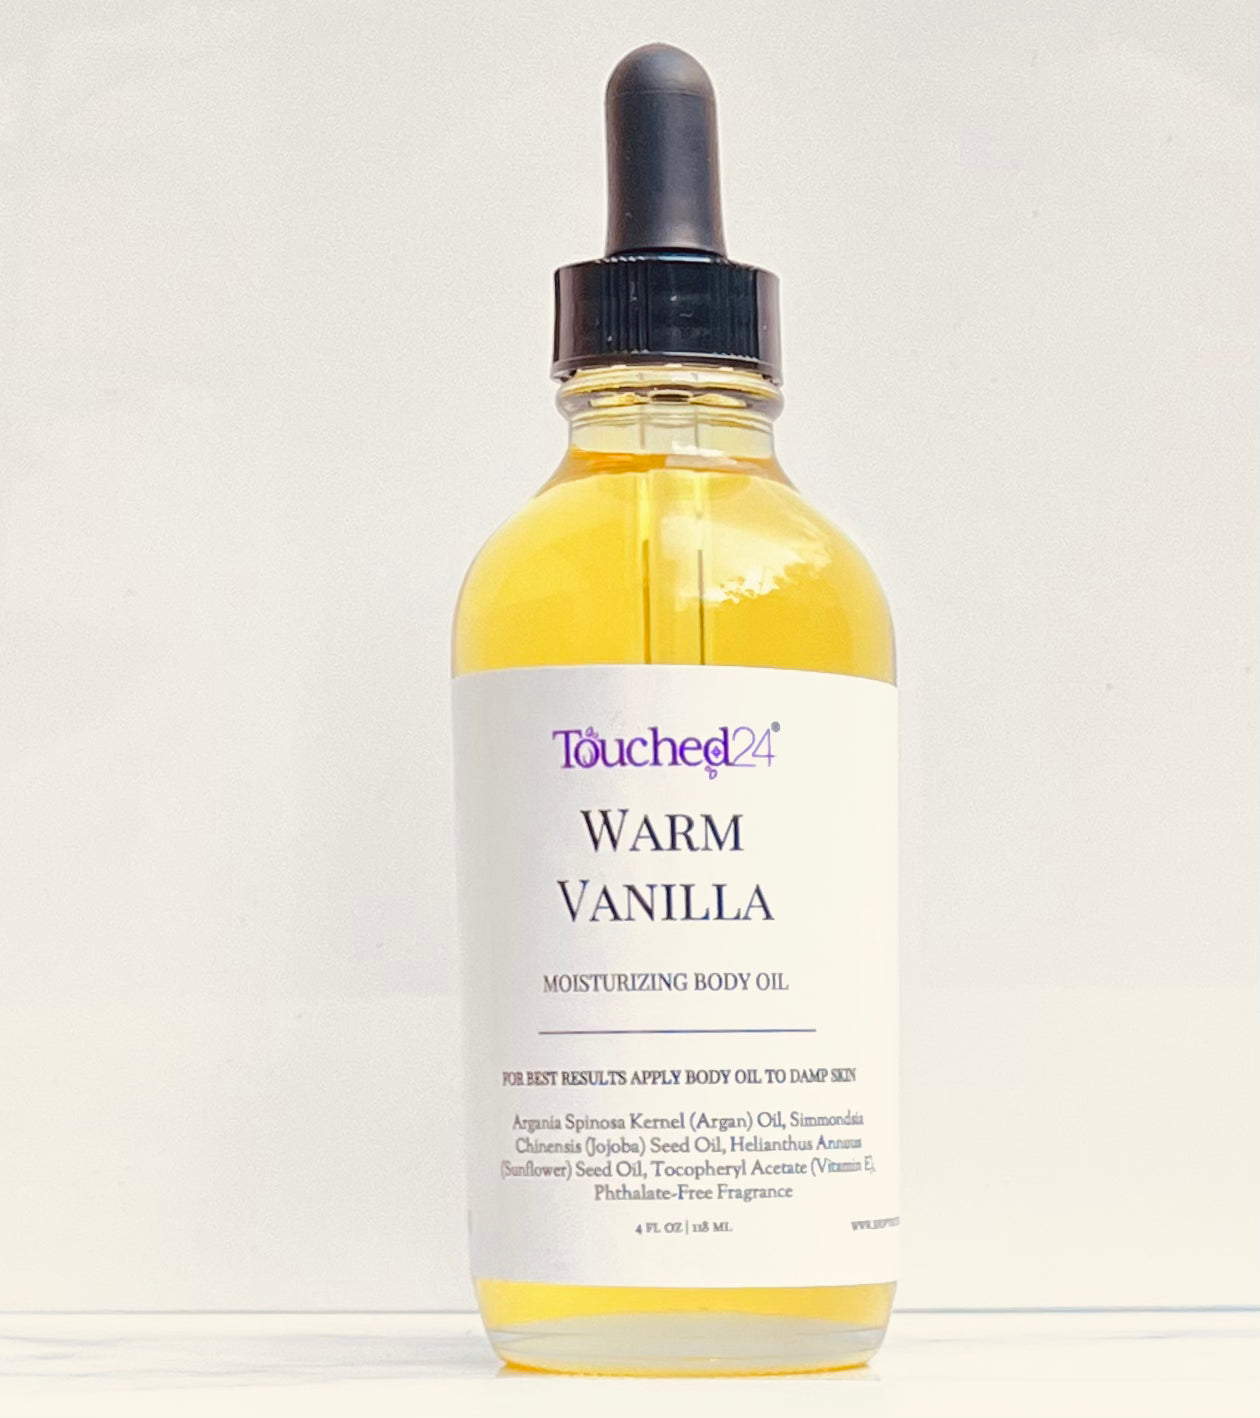 Body Oils + Facial Care – Touched24